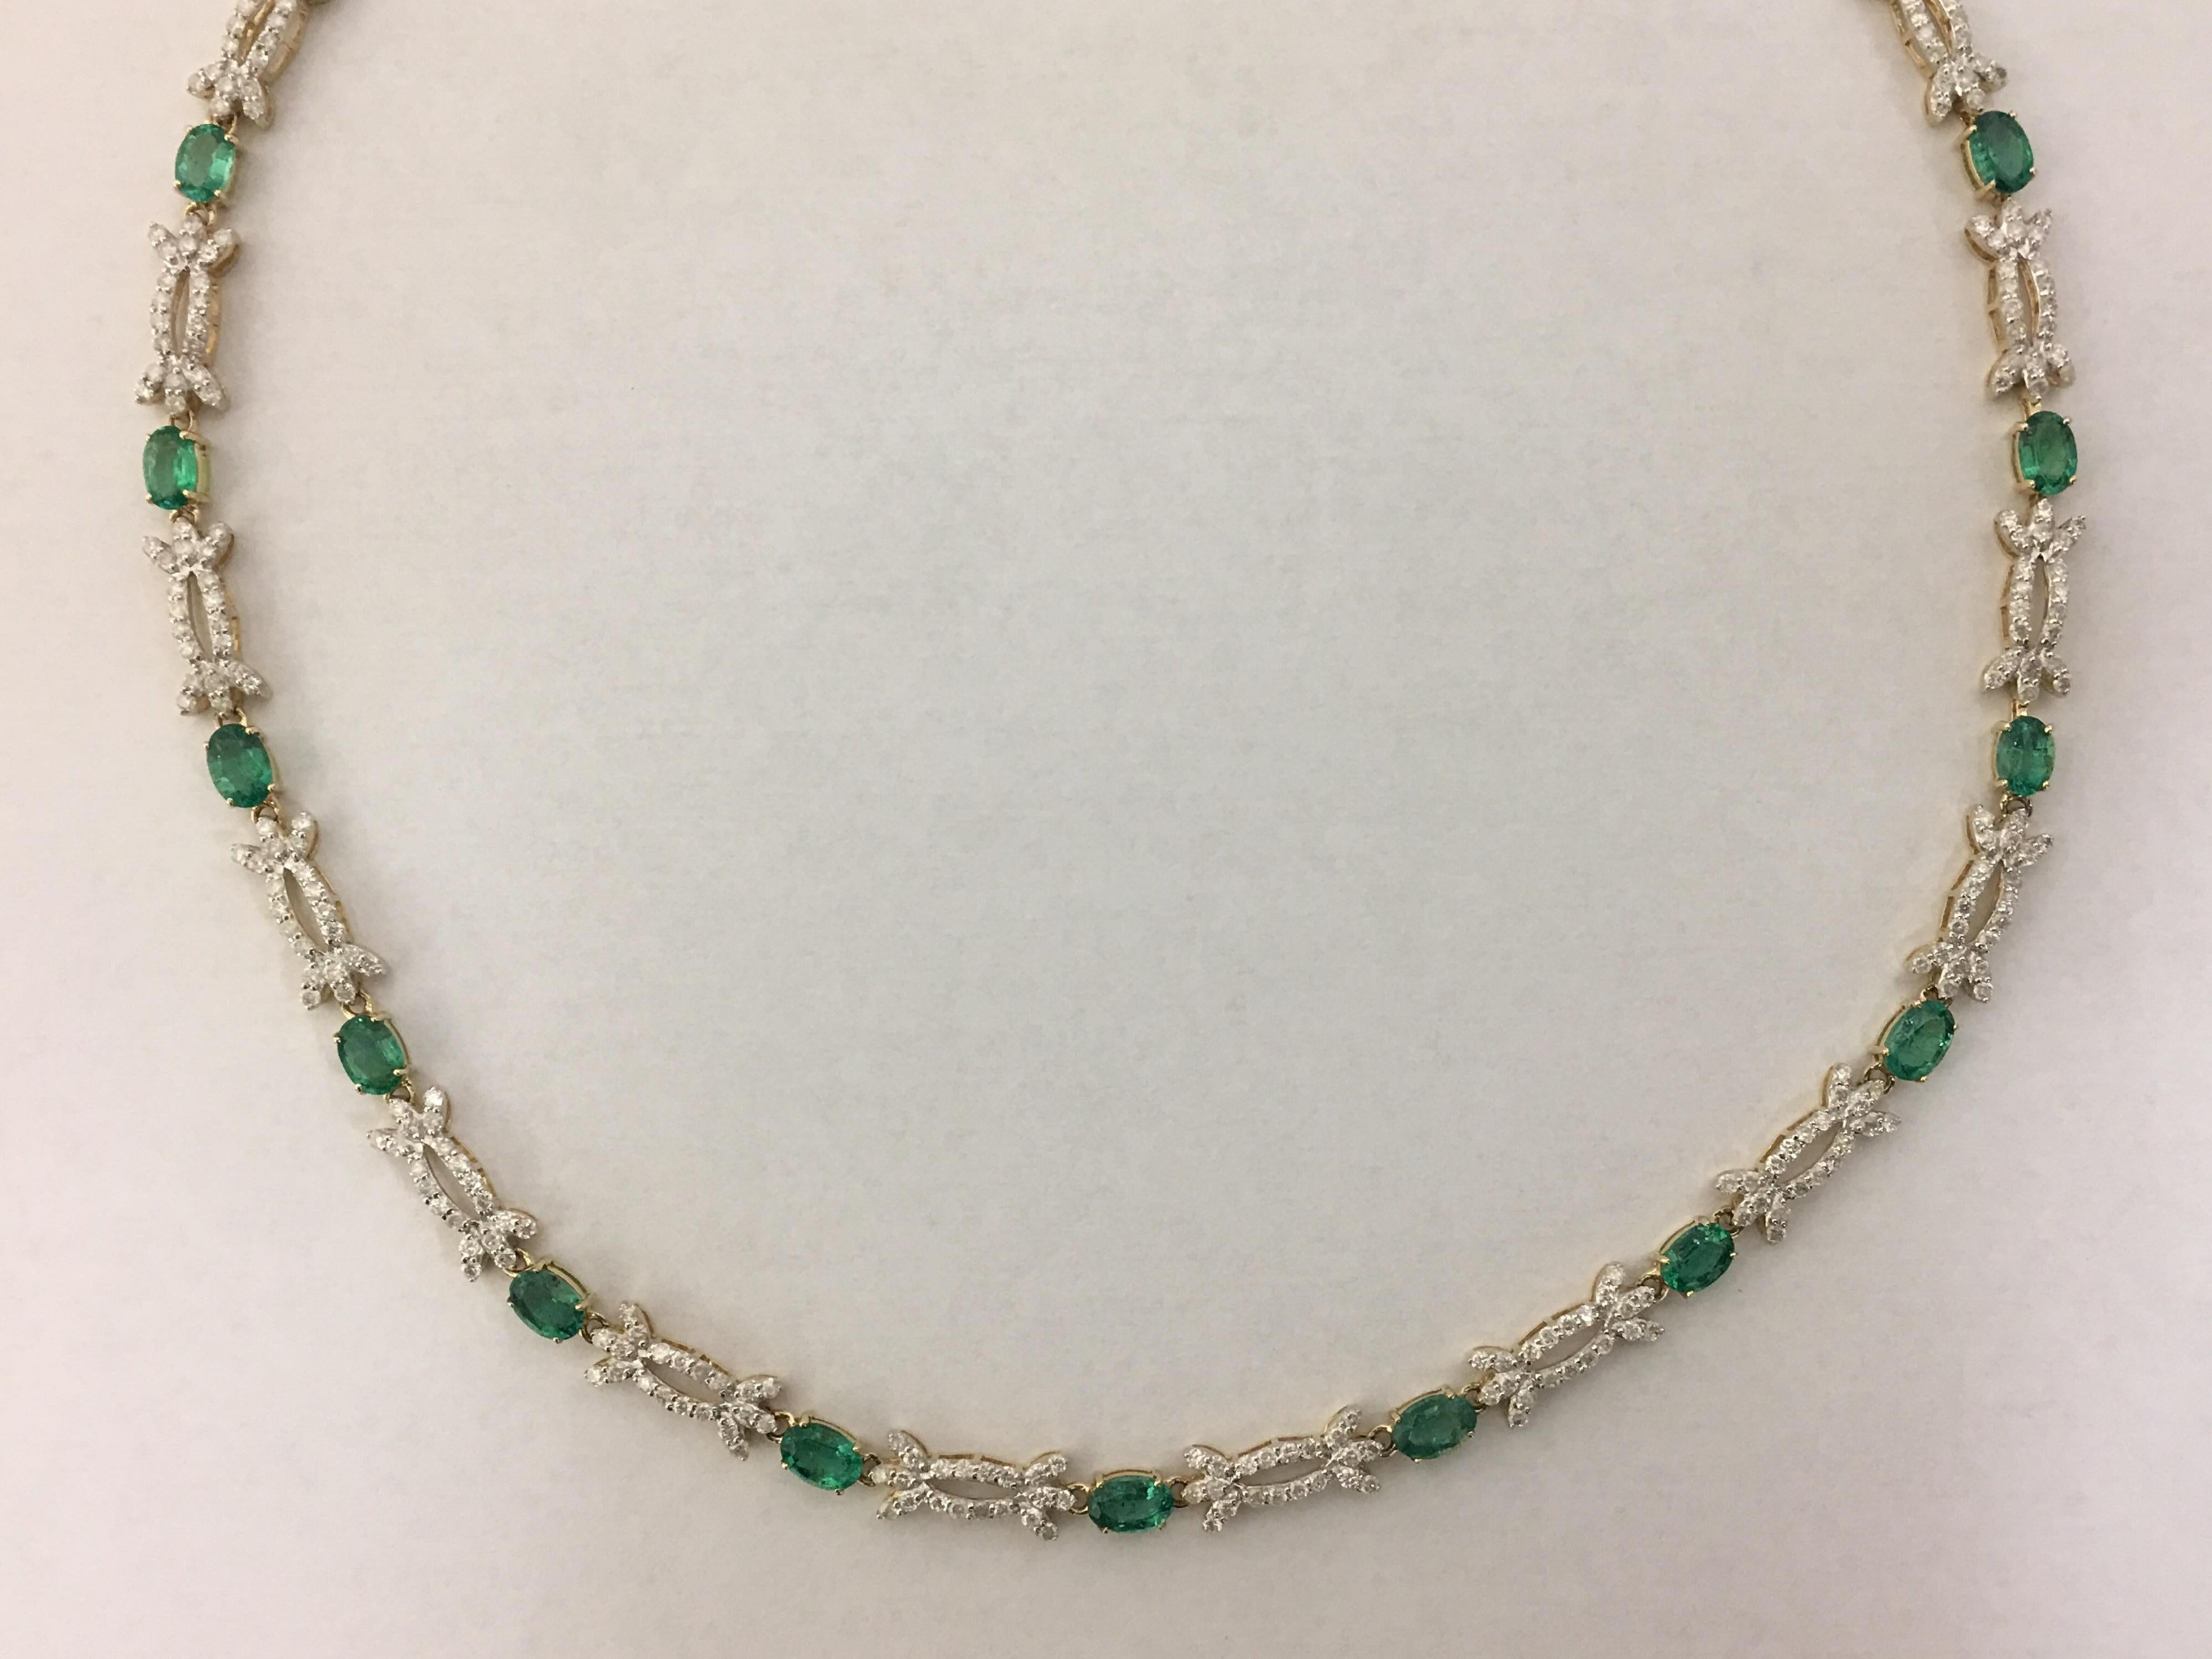 Natural Oval 8.06 Carat Emerald and Round  4.96 Carat White Diamonds ( Color G-H )  set in 14 Karat yellow gold   is one of a kind handcrafted  Necklace. Total weight of the Necklace is 19.60 Gram. Length of Necklace is 17.5 Inches.